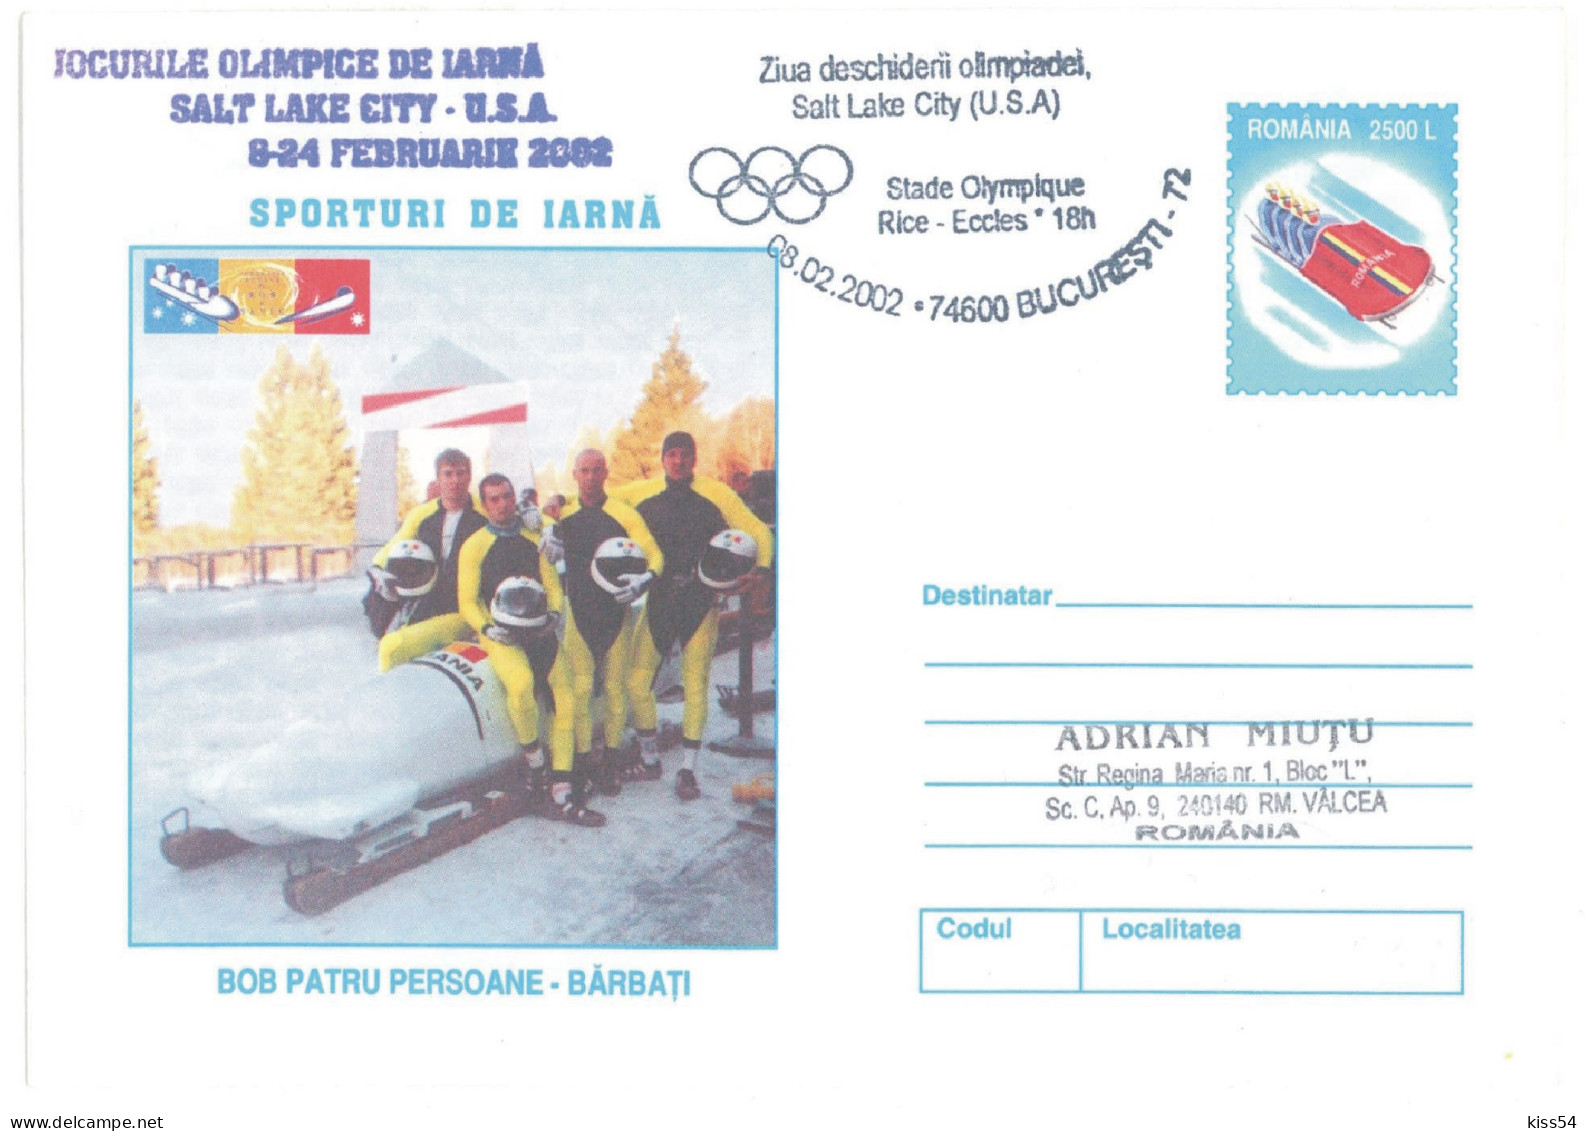 IP 2001 - 0226a U. S. A. SALT LAKE CITY 2002 - 4 BOBSLEIGHT MEN - Winter Olympic Games - Stationery - Used - 2001 - Inverno2002: Salt Lake City